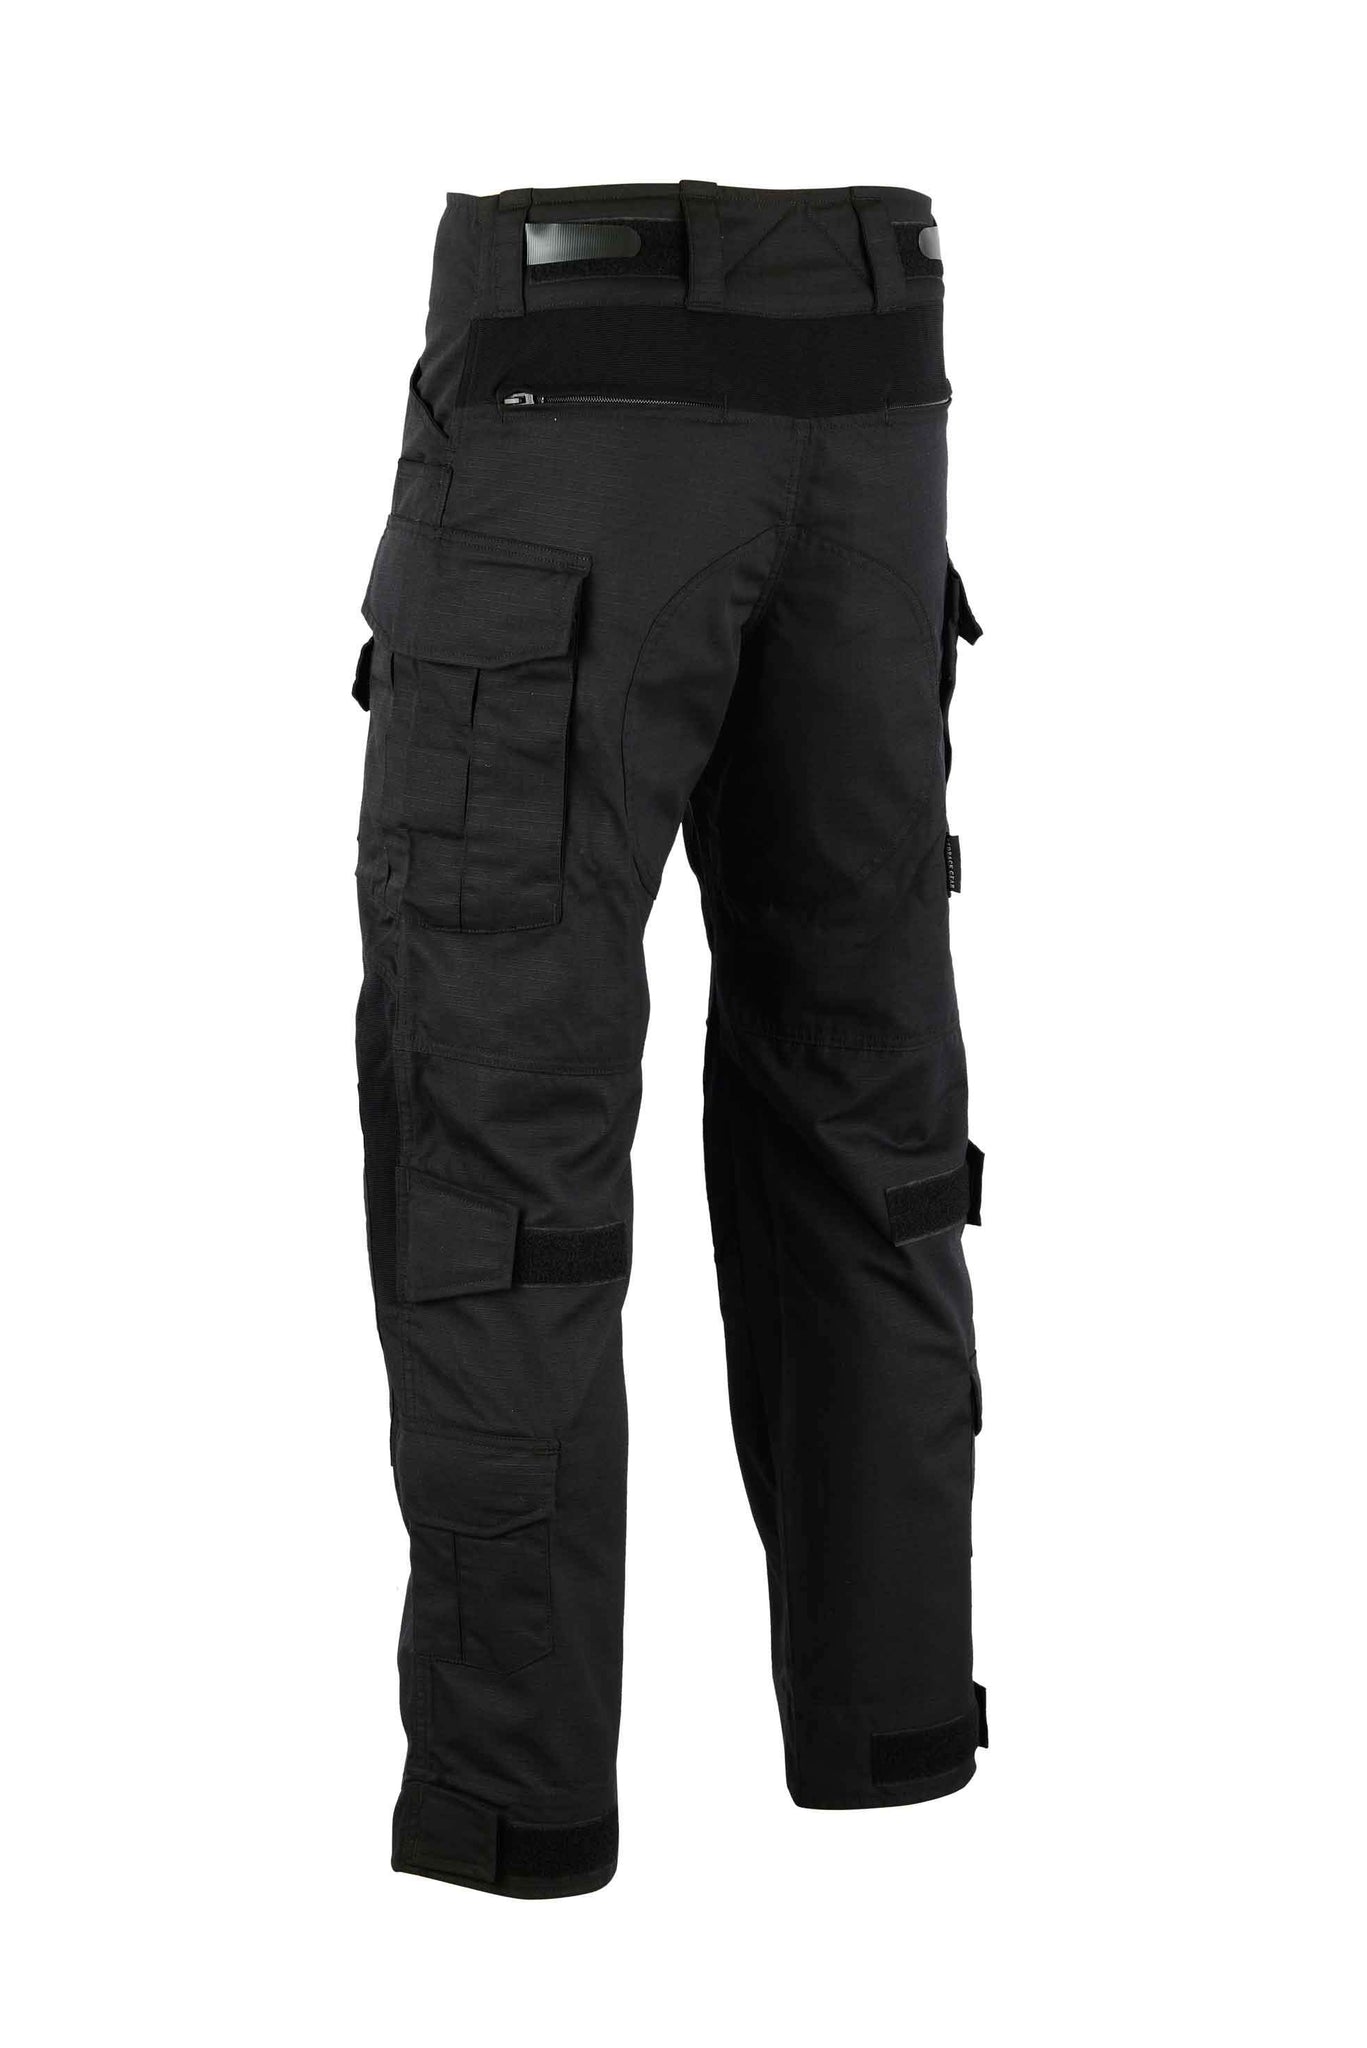 Special Operations Pants – Canadian Cartel